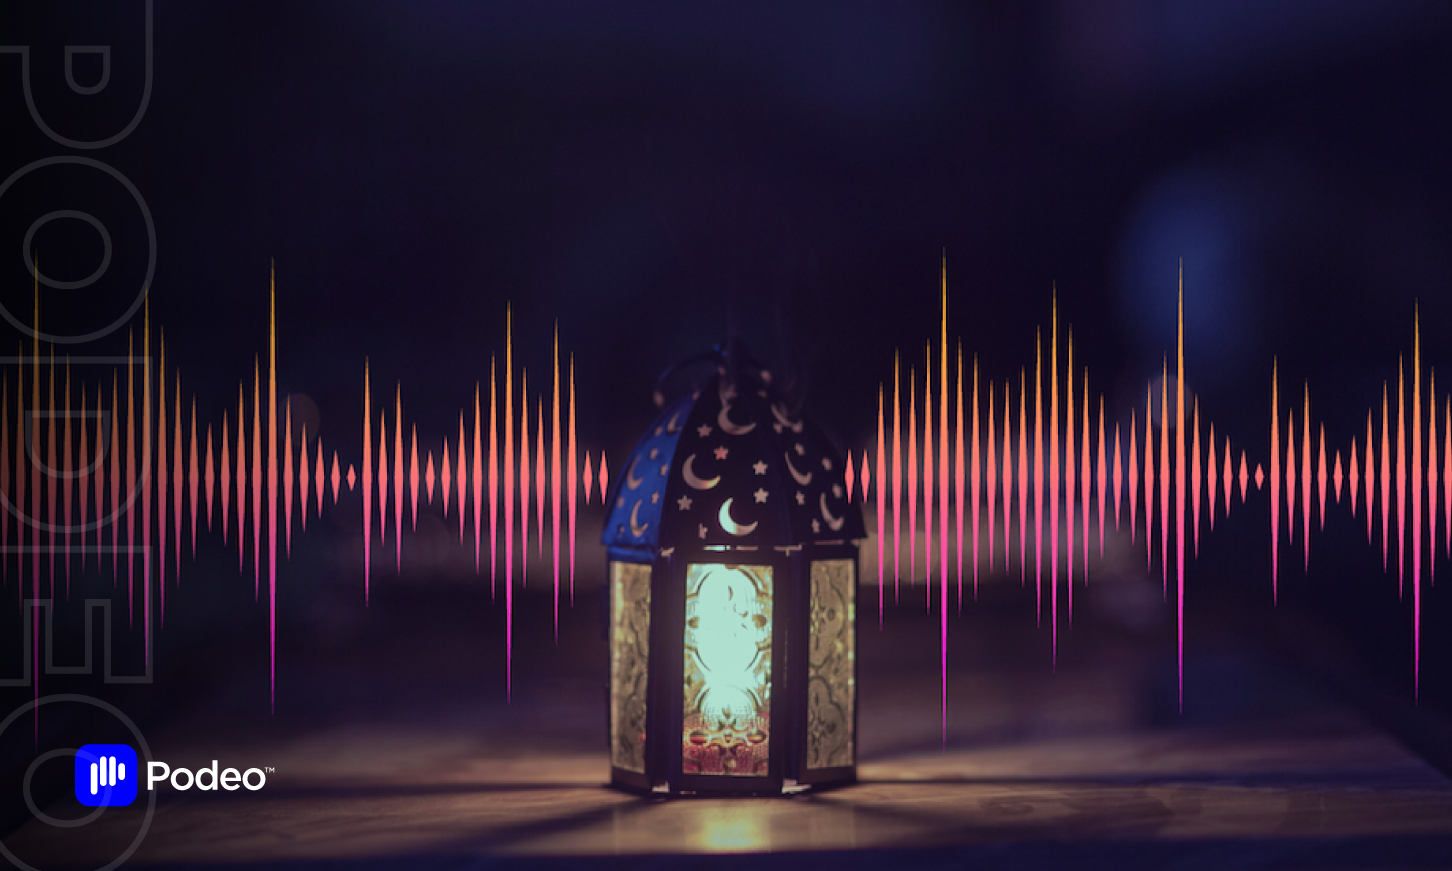 Entertaining podcasts during Ramadan on Podeo... Listen to them and have fun!